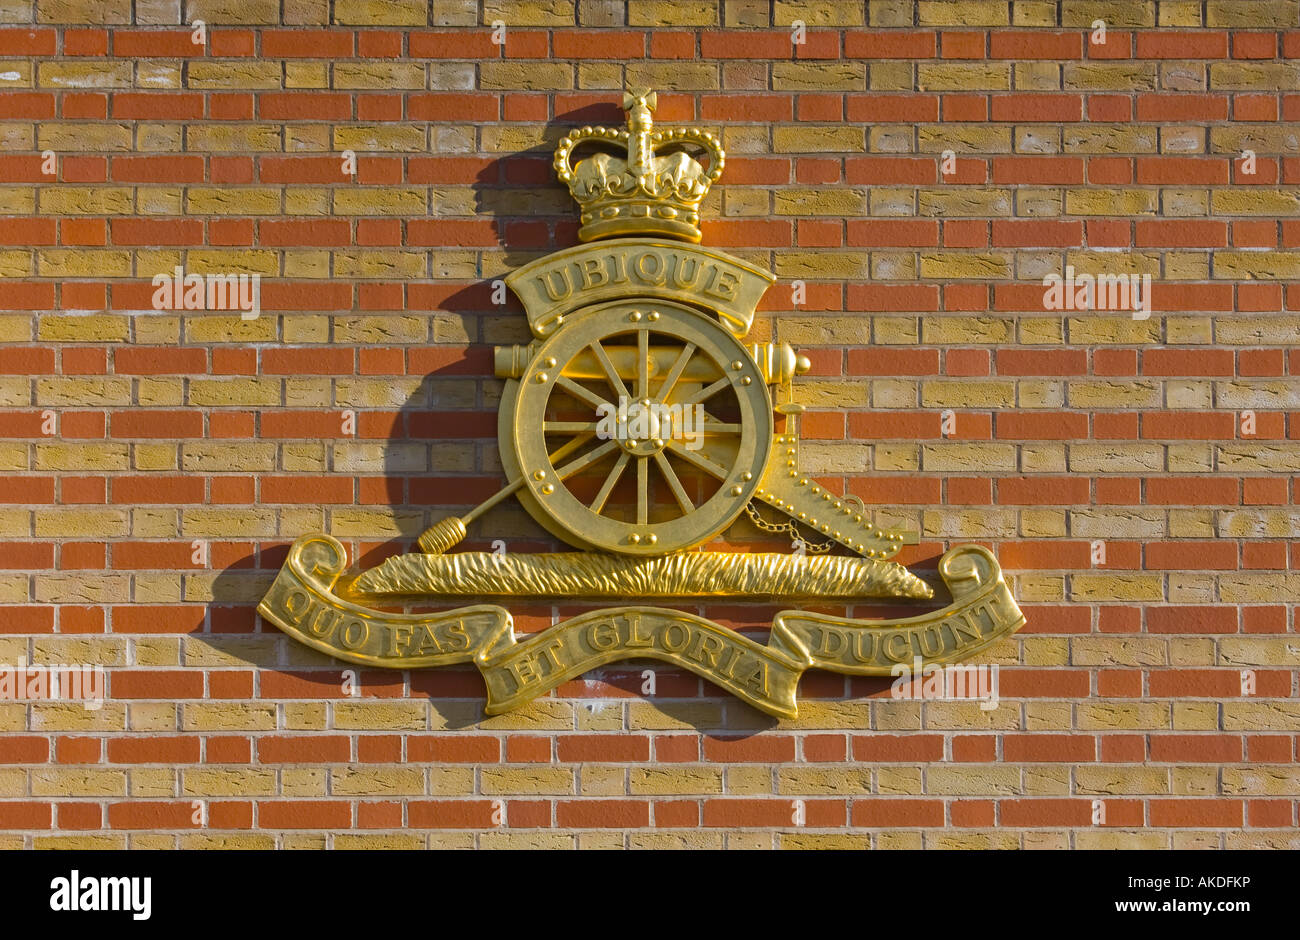 Royal Artillery motto and crest on the wall of the firepower museum in Woolwich Stock Photo